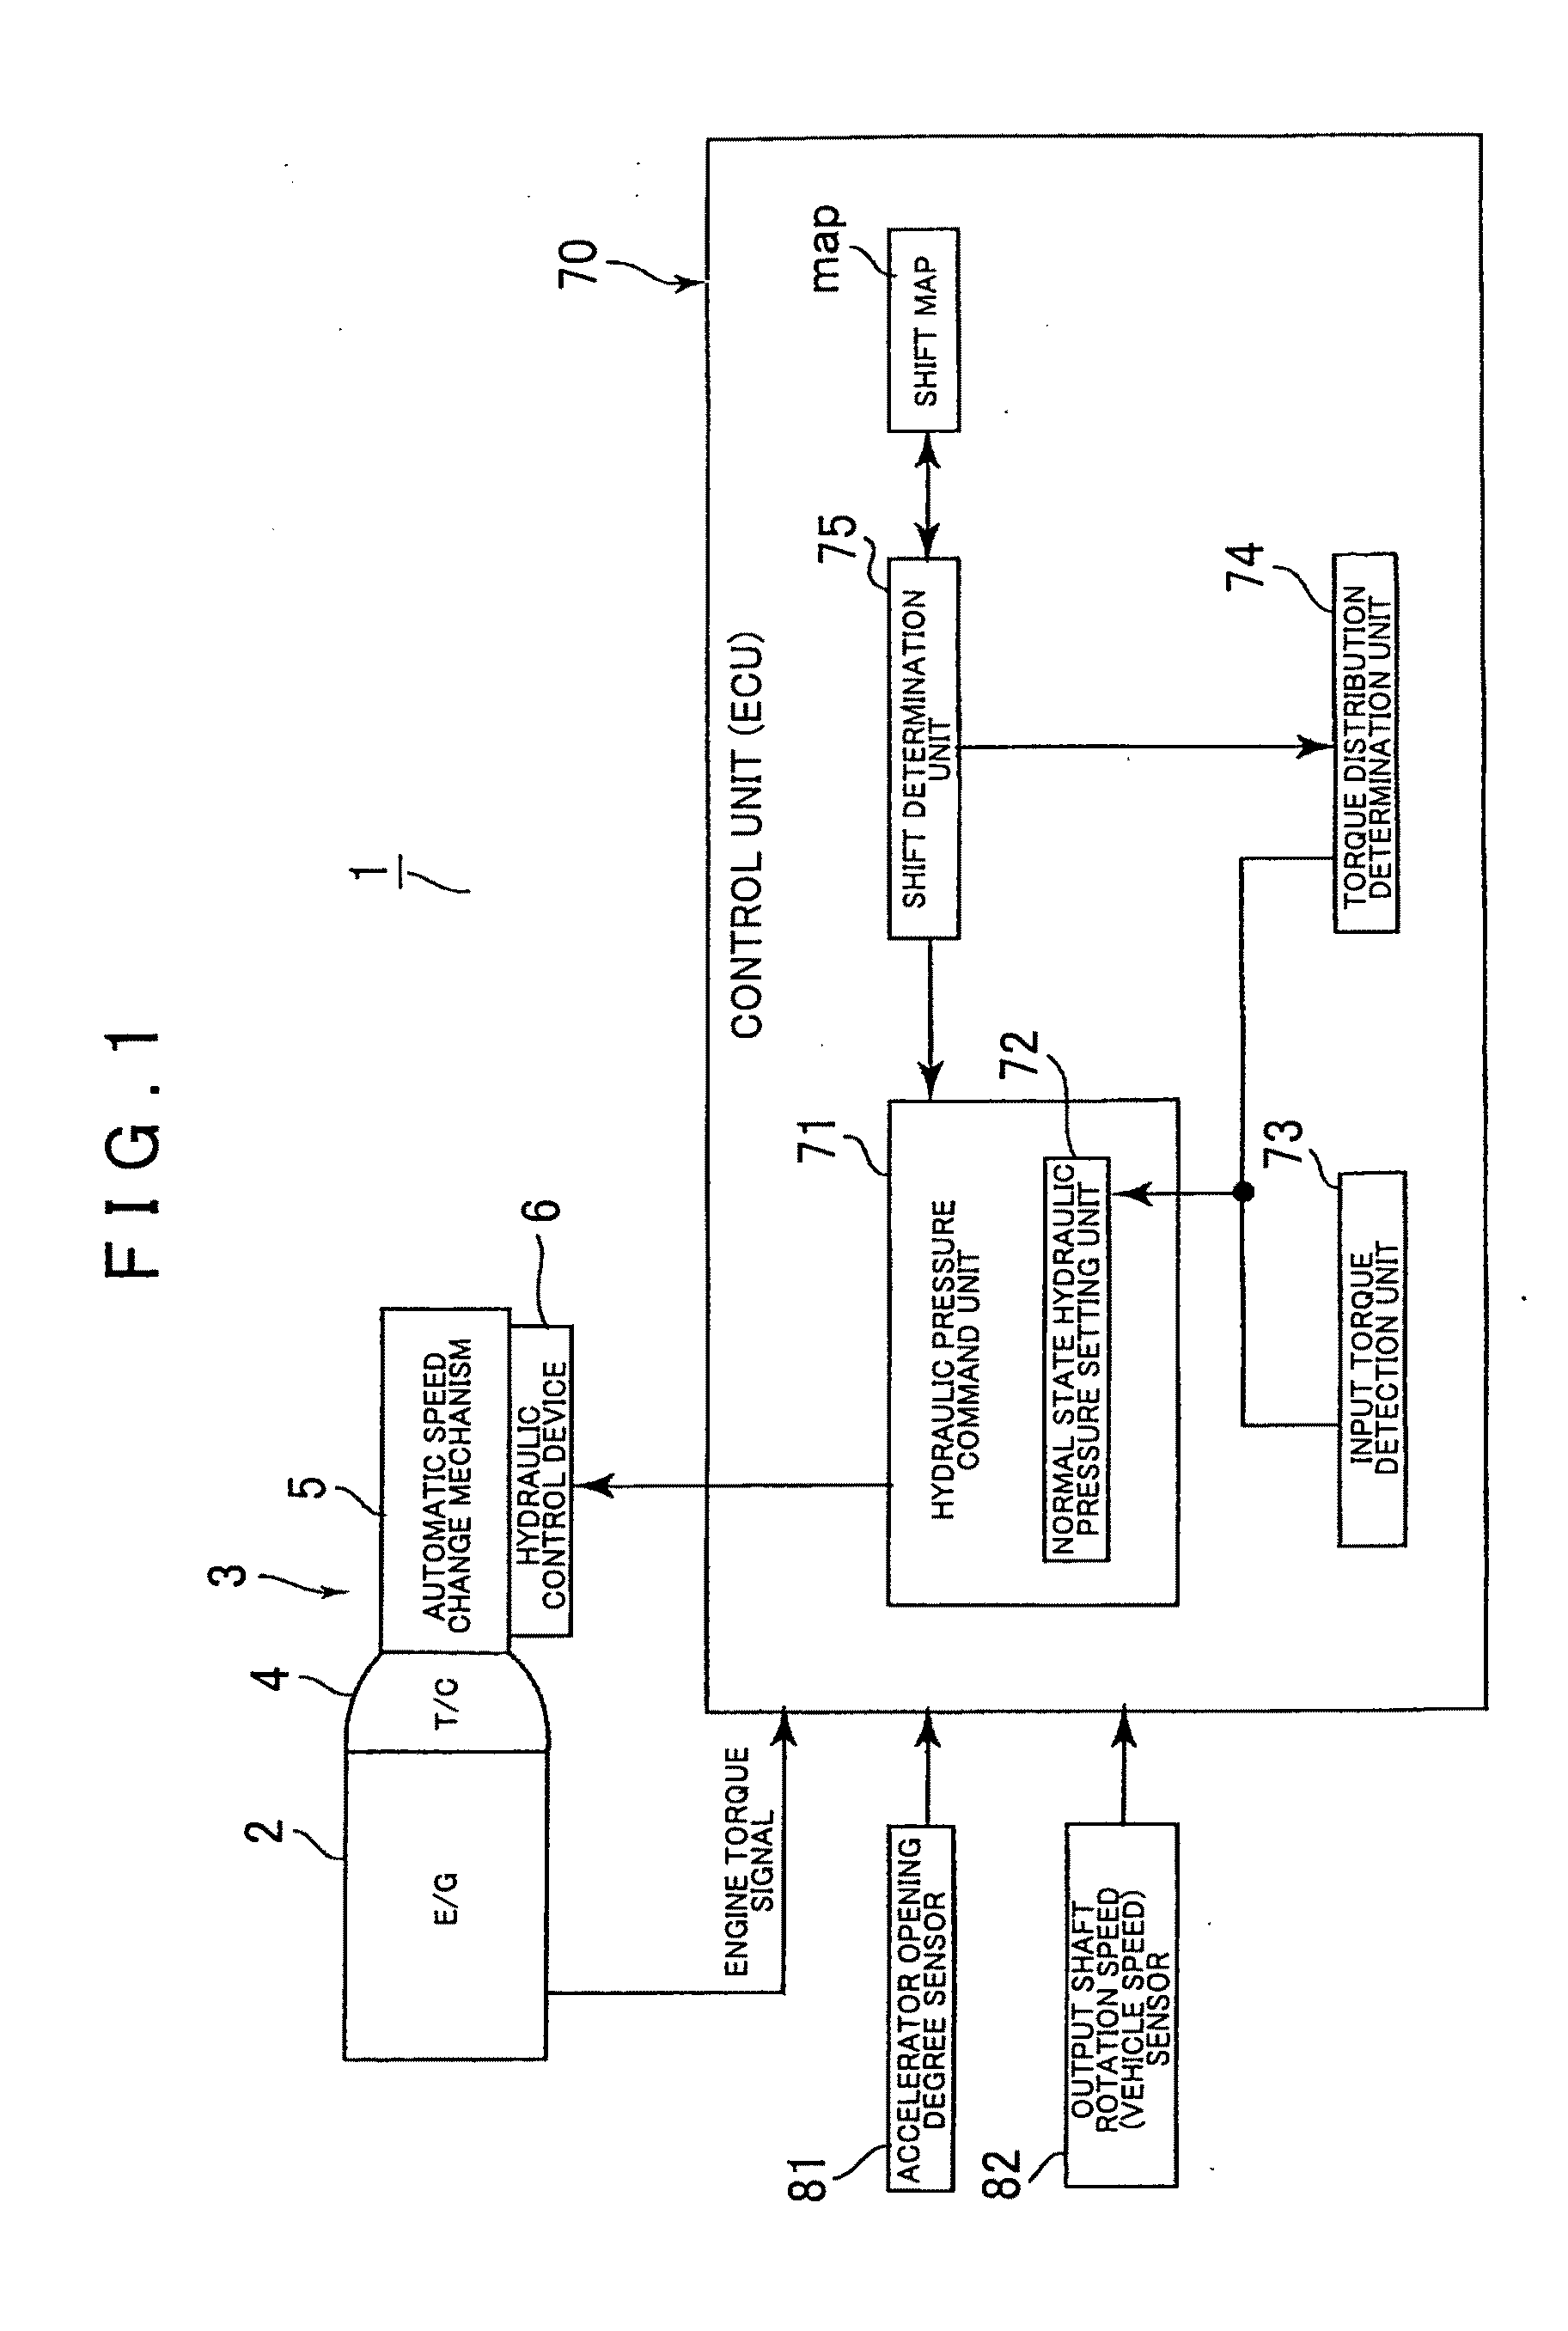 Control device for automatic transmission